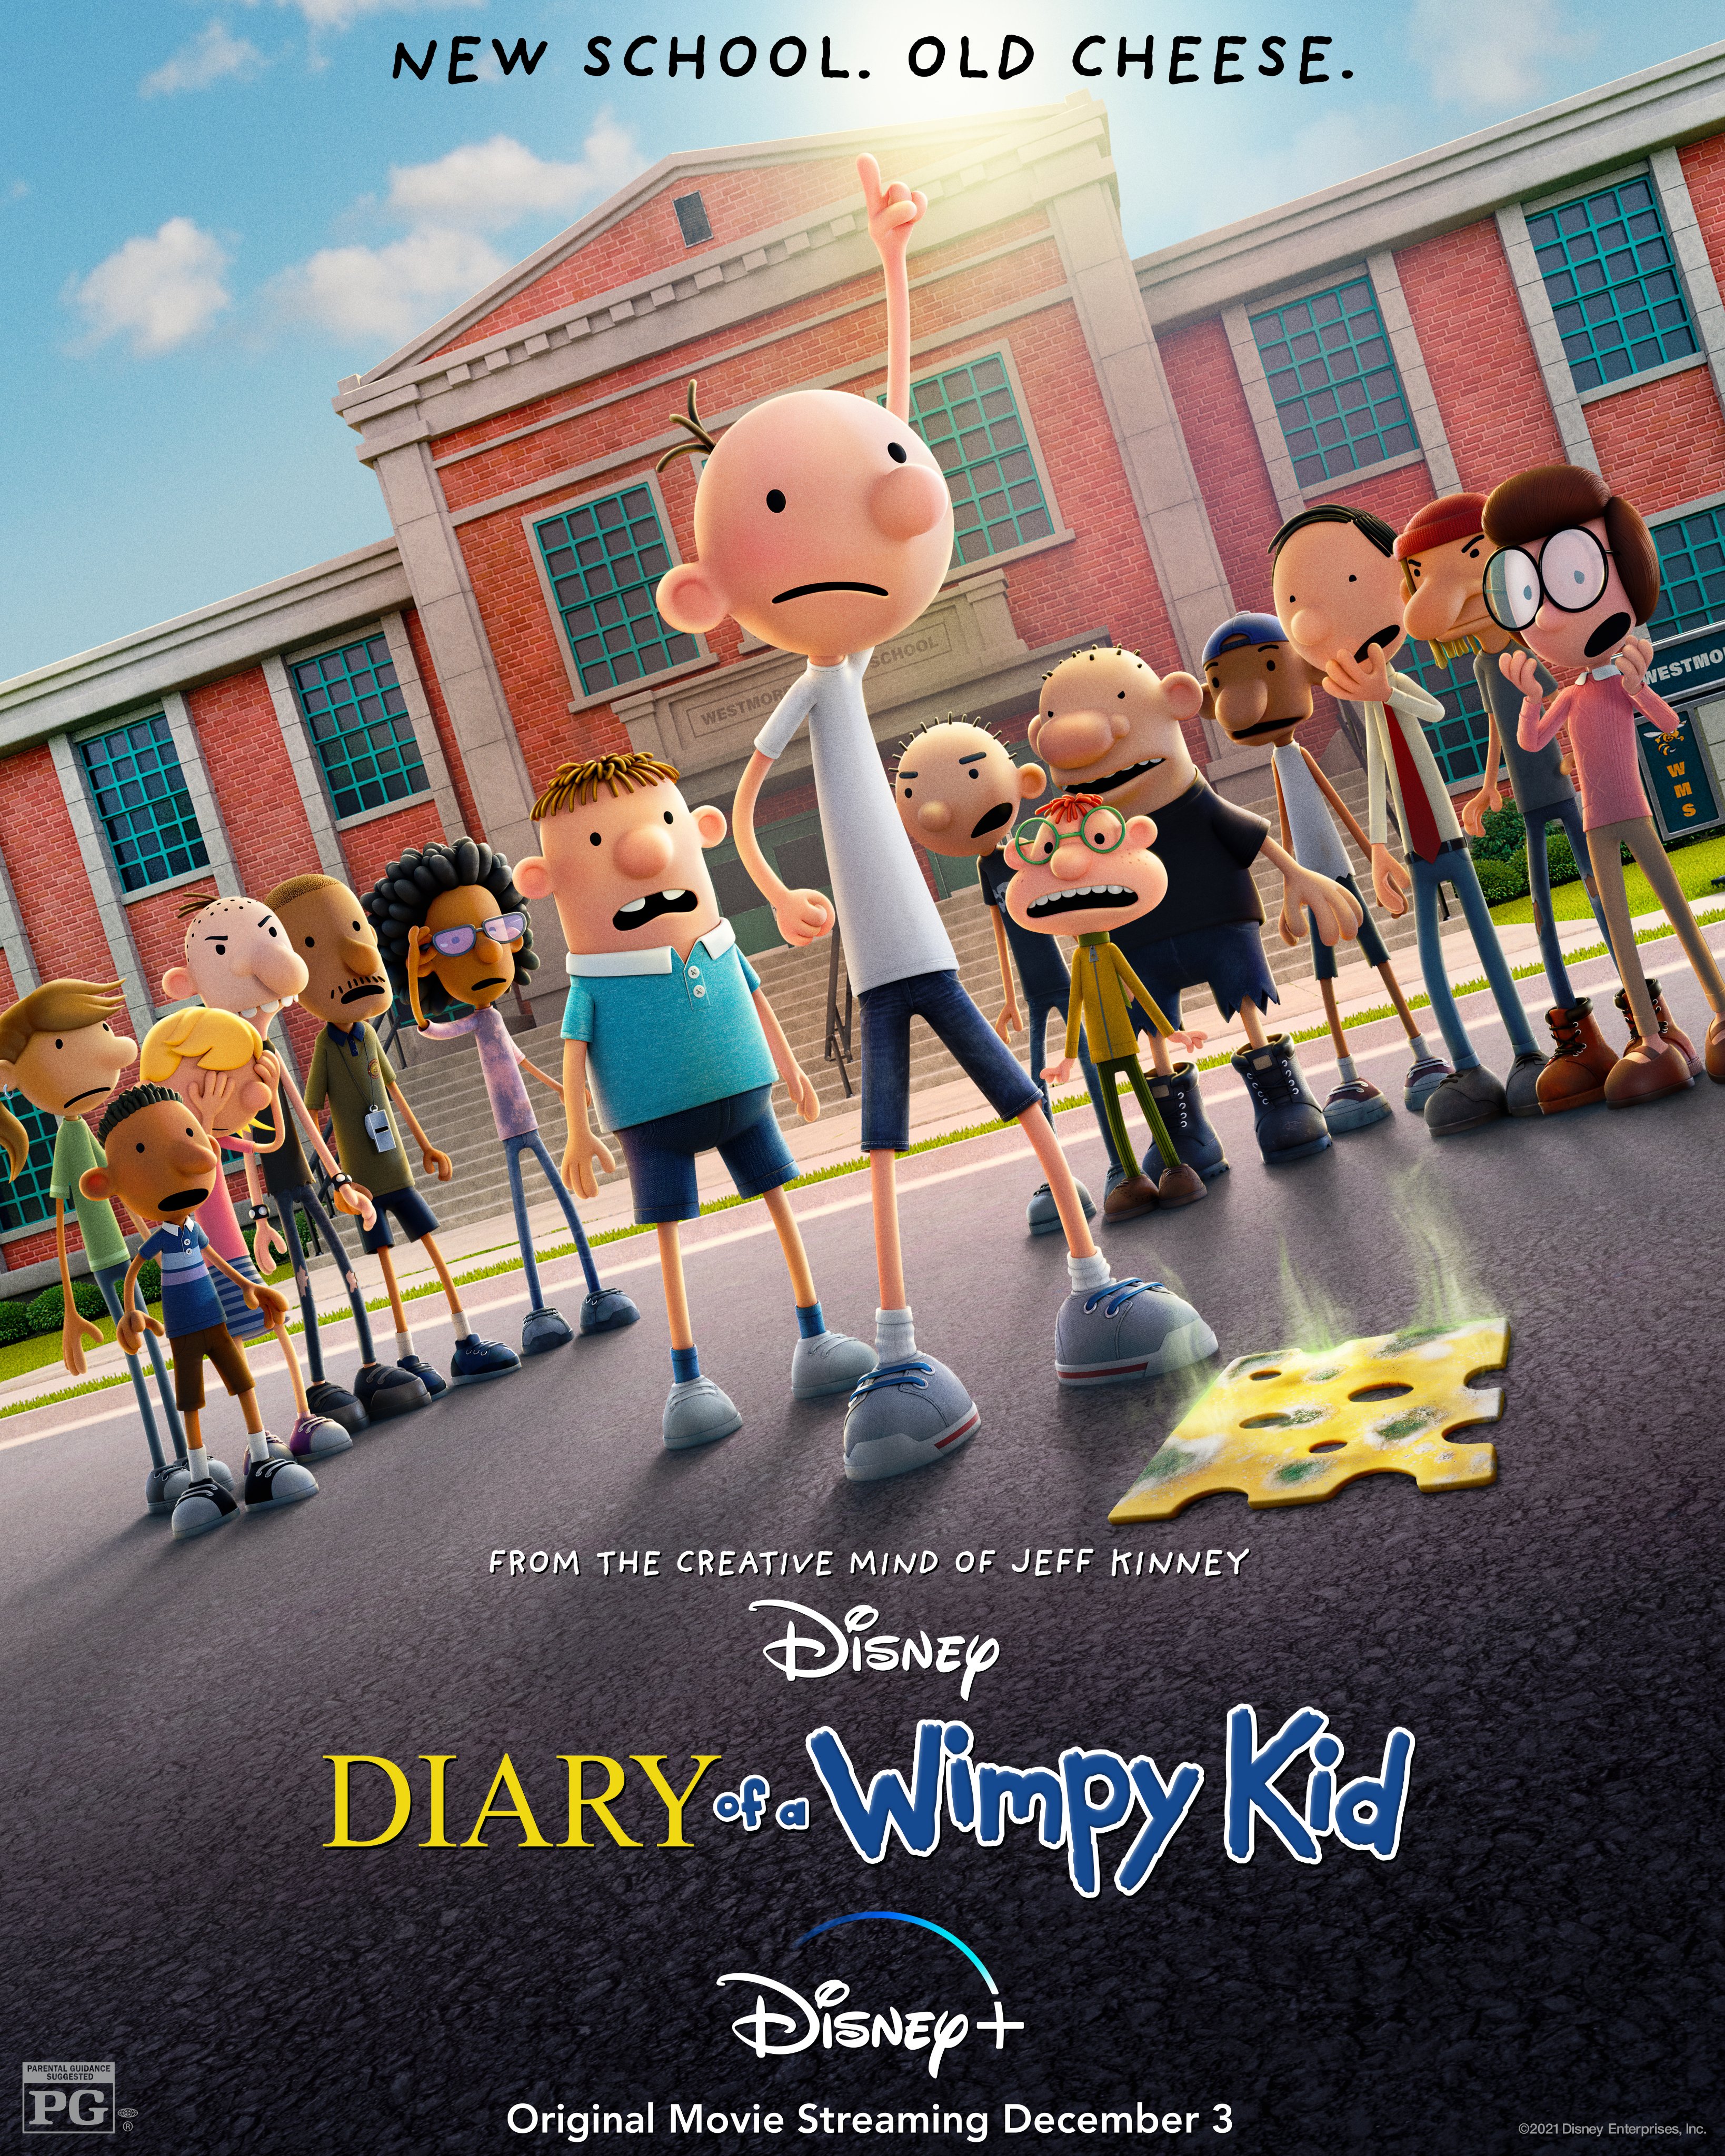 Diary of a Wimpy Kid 2 Rodrick Rules (2022) HDRip English Full Movie Watch Online Free